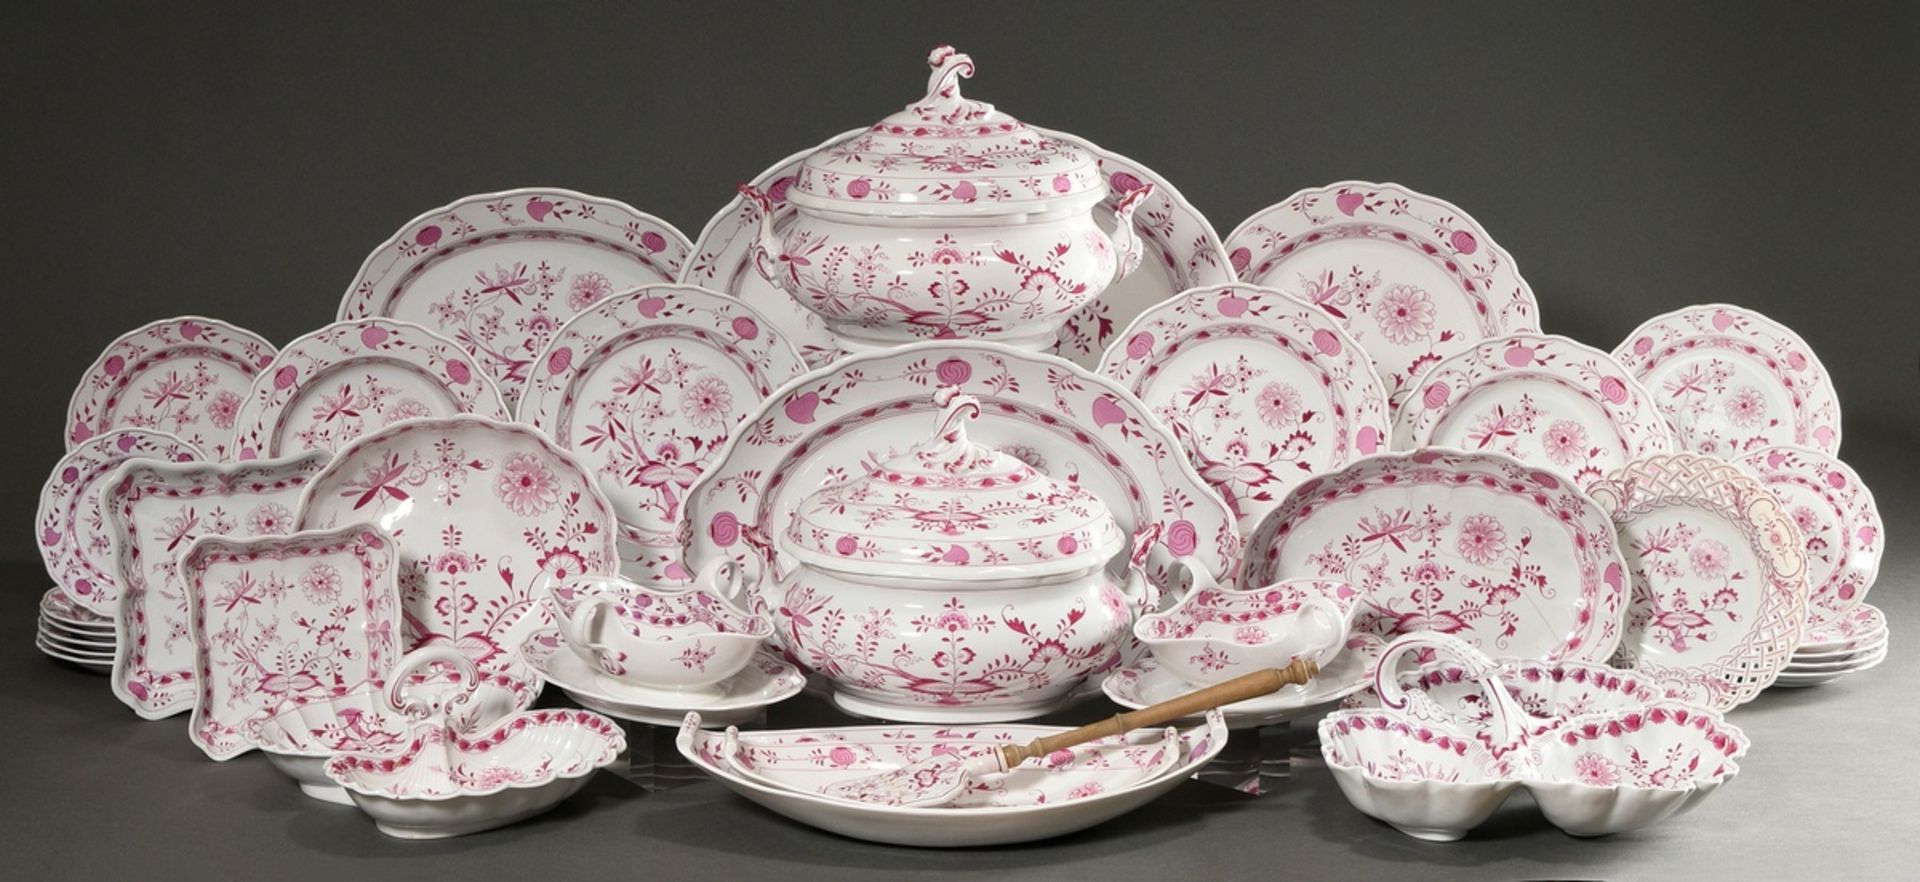 65 Pieces rare Meissen dinner service "Zwiebelmuster Pink", custom made around 1900, consisting of: - Image 2 of 27